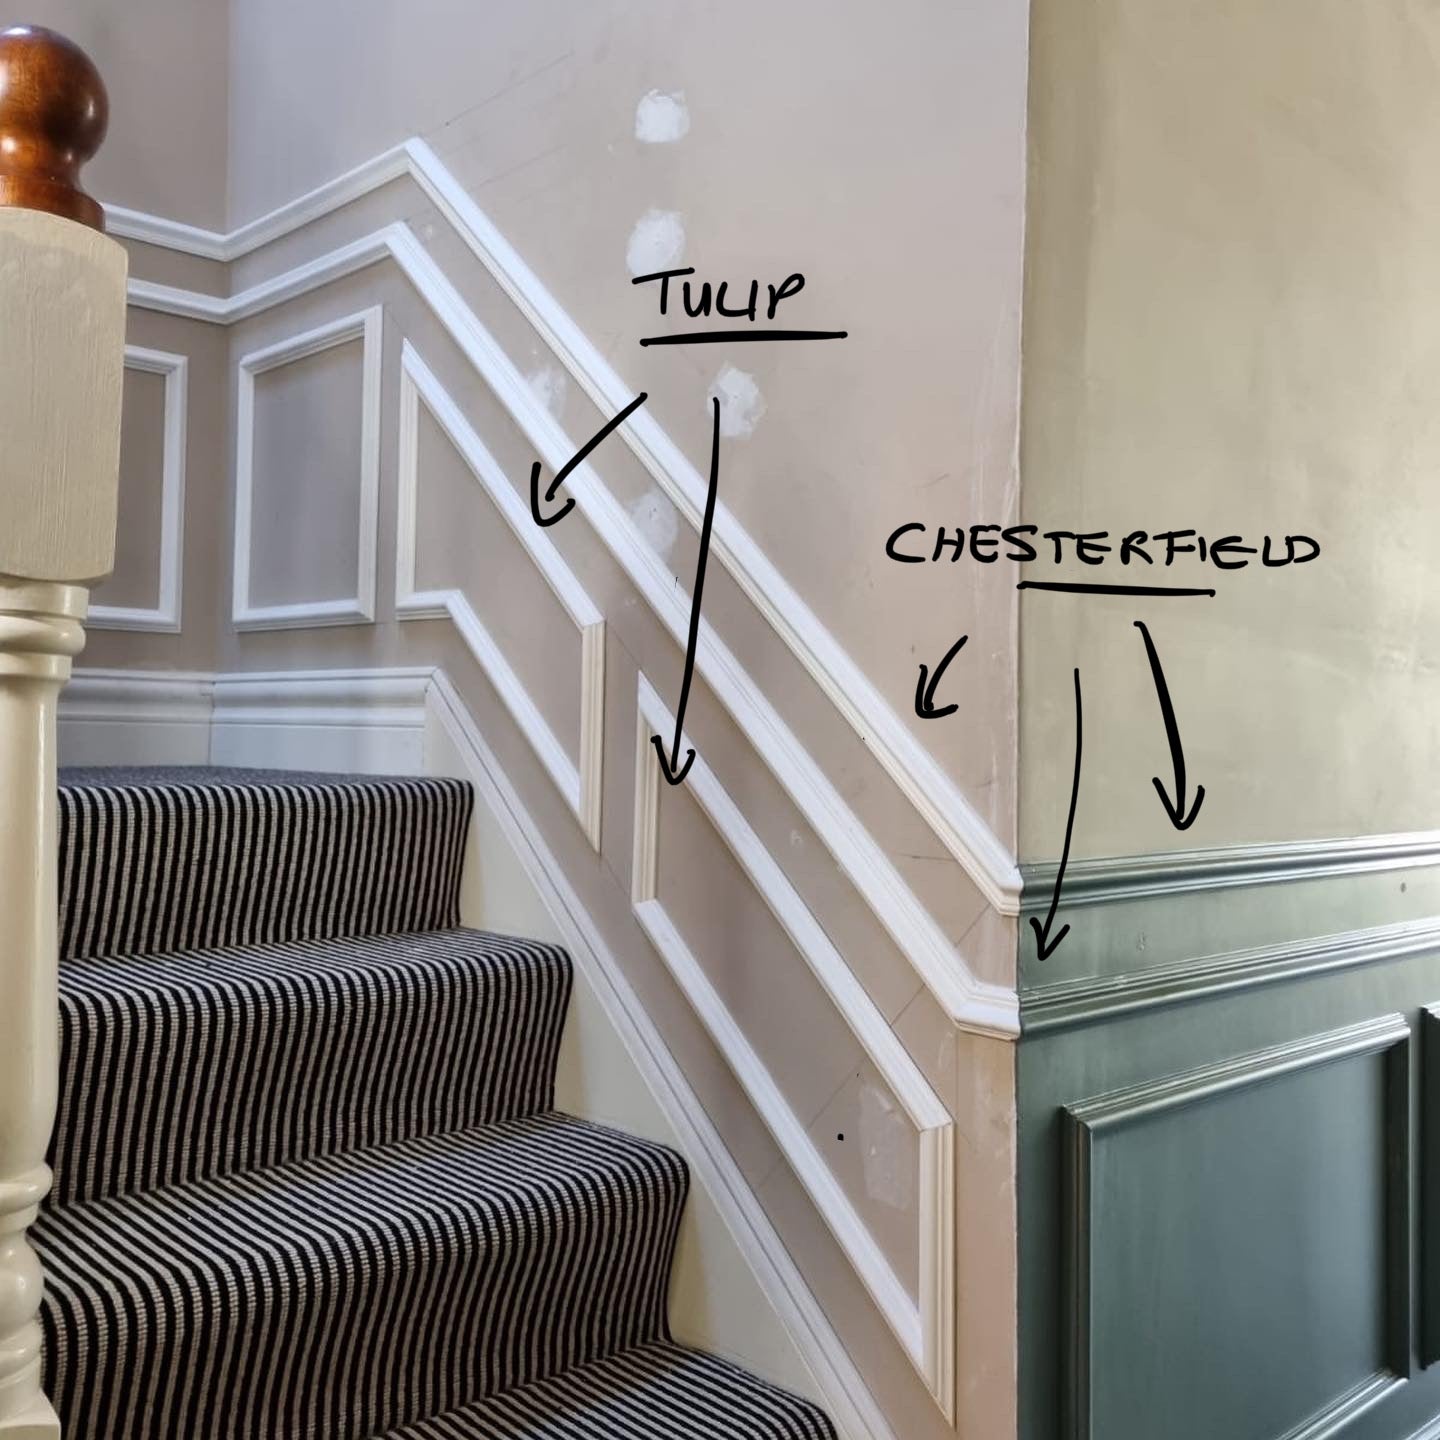 Chesterfield - Dado Rail installed along a staircase